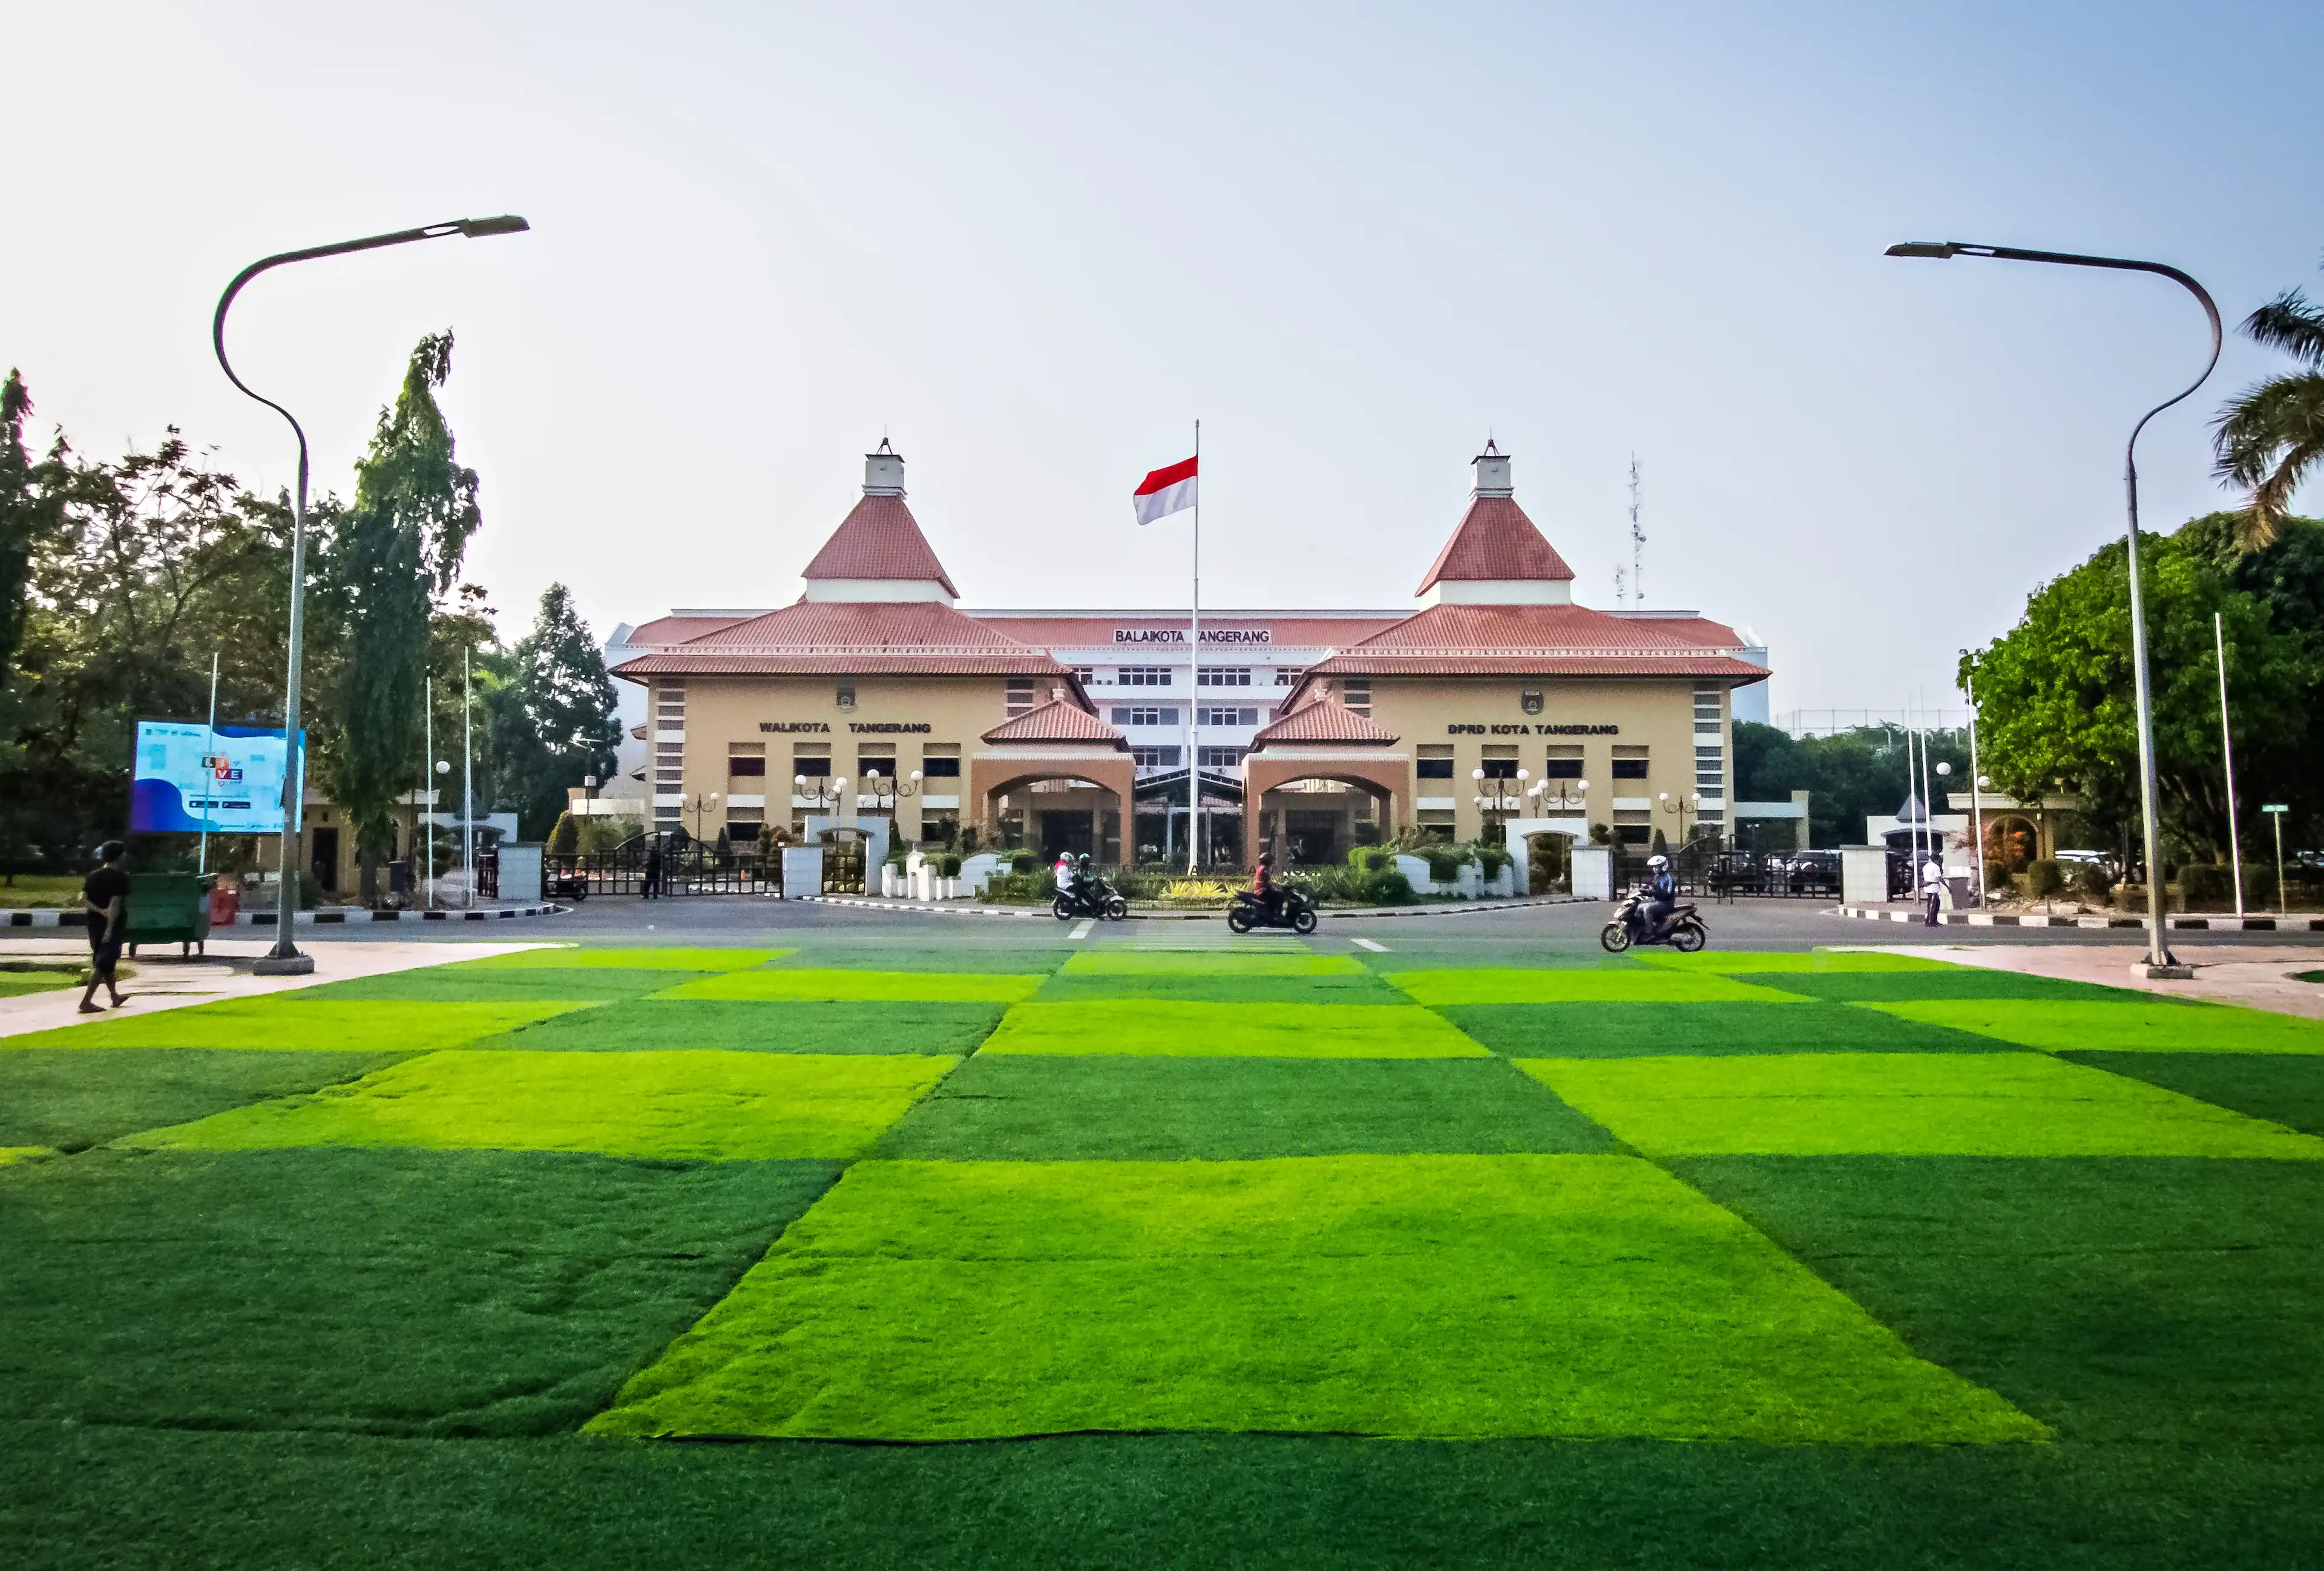 Tangerang, Indonesia : Civic centre and government office of Tangerang City, Banten, Indonesia. Also as a landmark of the city (11/2019).